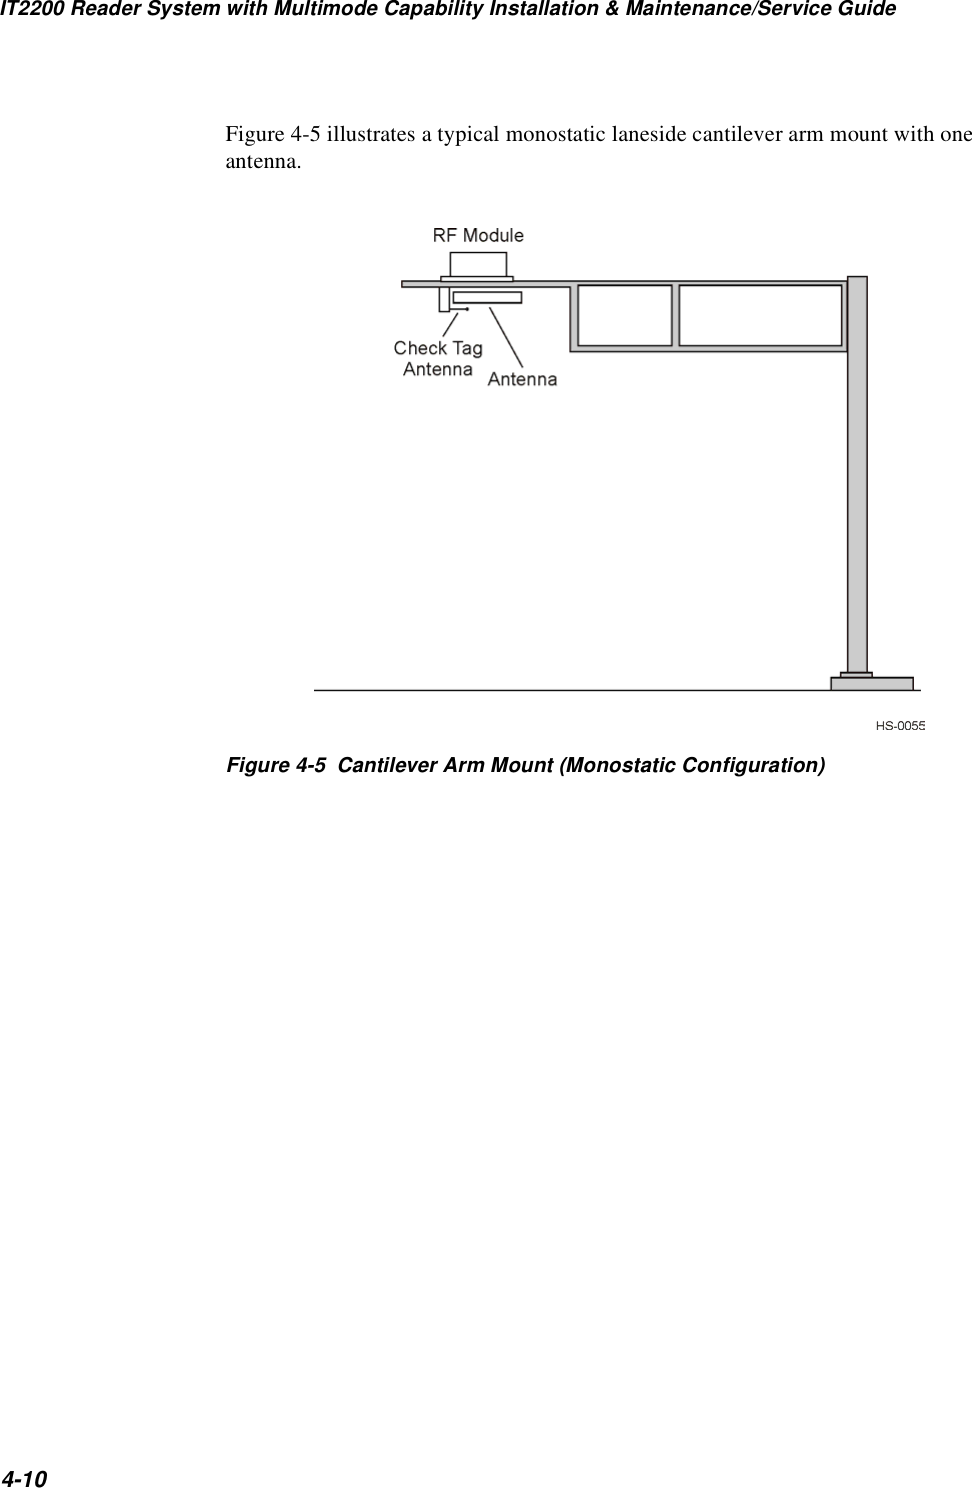 IT2200 Reader System with Multimode Capability Installation &amp; Maintenance/Service Guide4-10Figure 4-5 illustrates a typical monostatic laneside cantilever arm mount with one antenna.Figure 4-5  Cantilever Arm Mount (Monostatic Configuration)